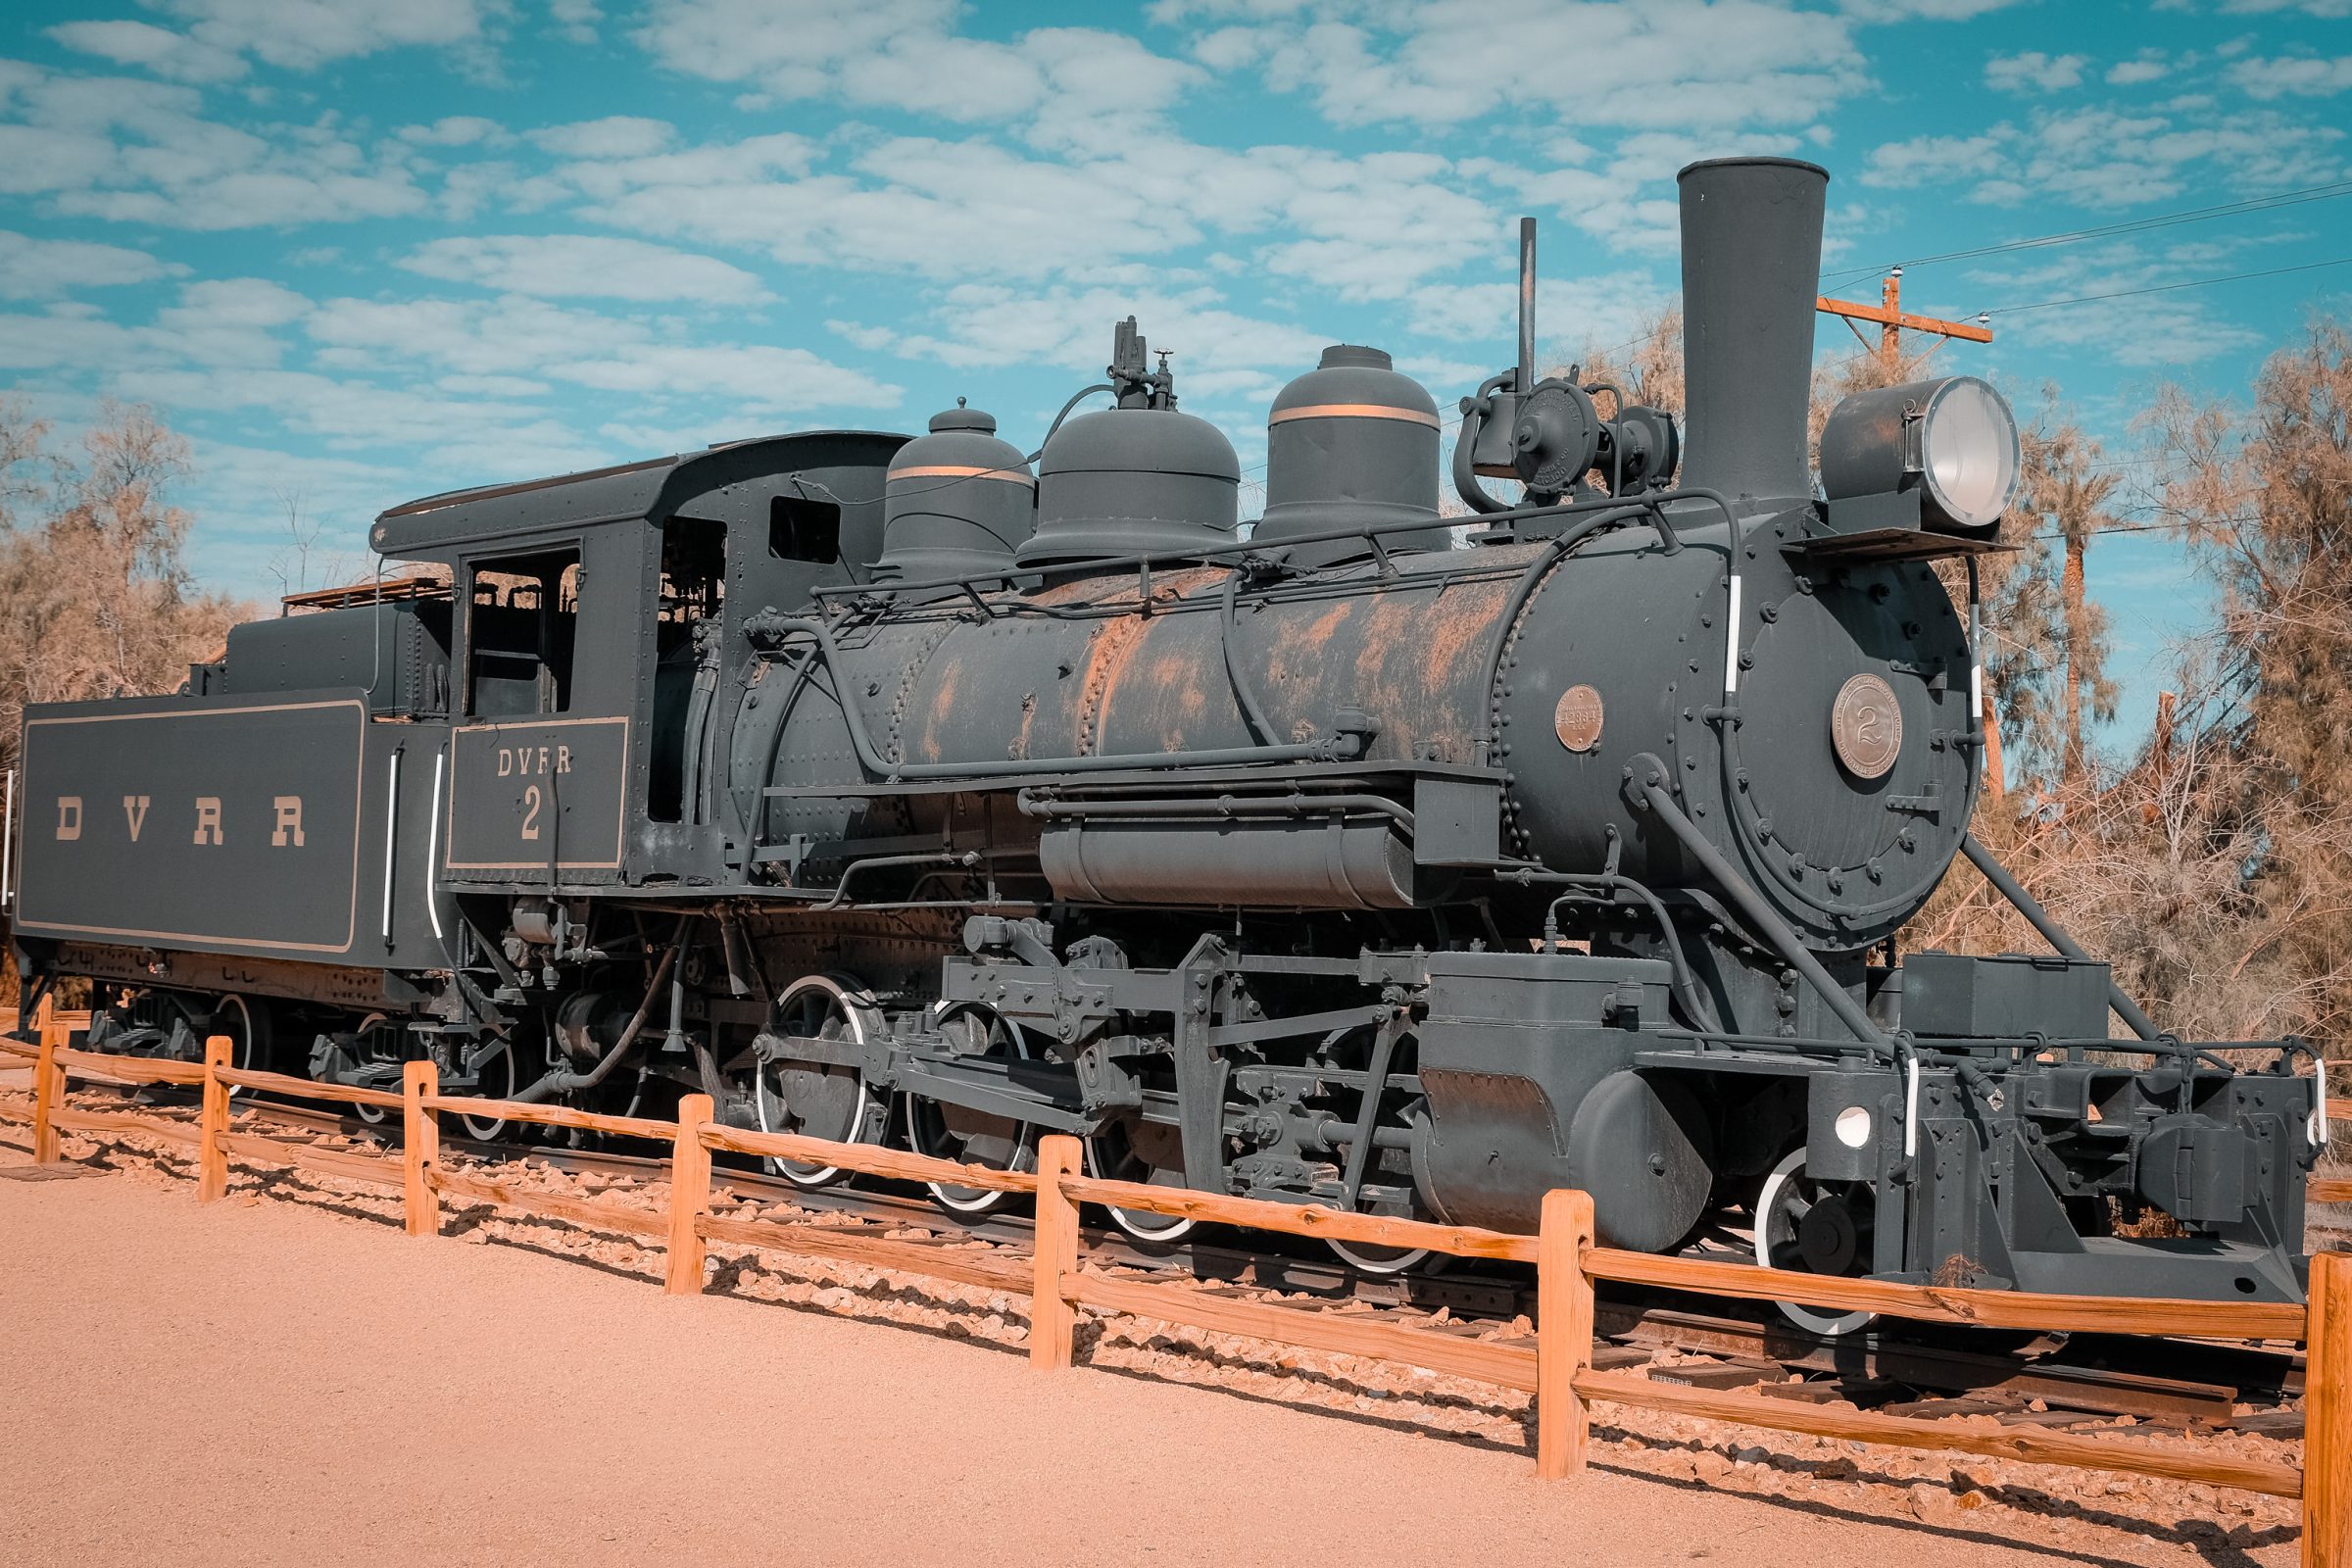 The old stream train at Furnace Creek | Tips for Death Valley